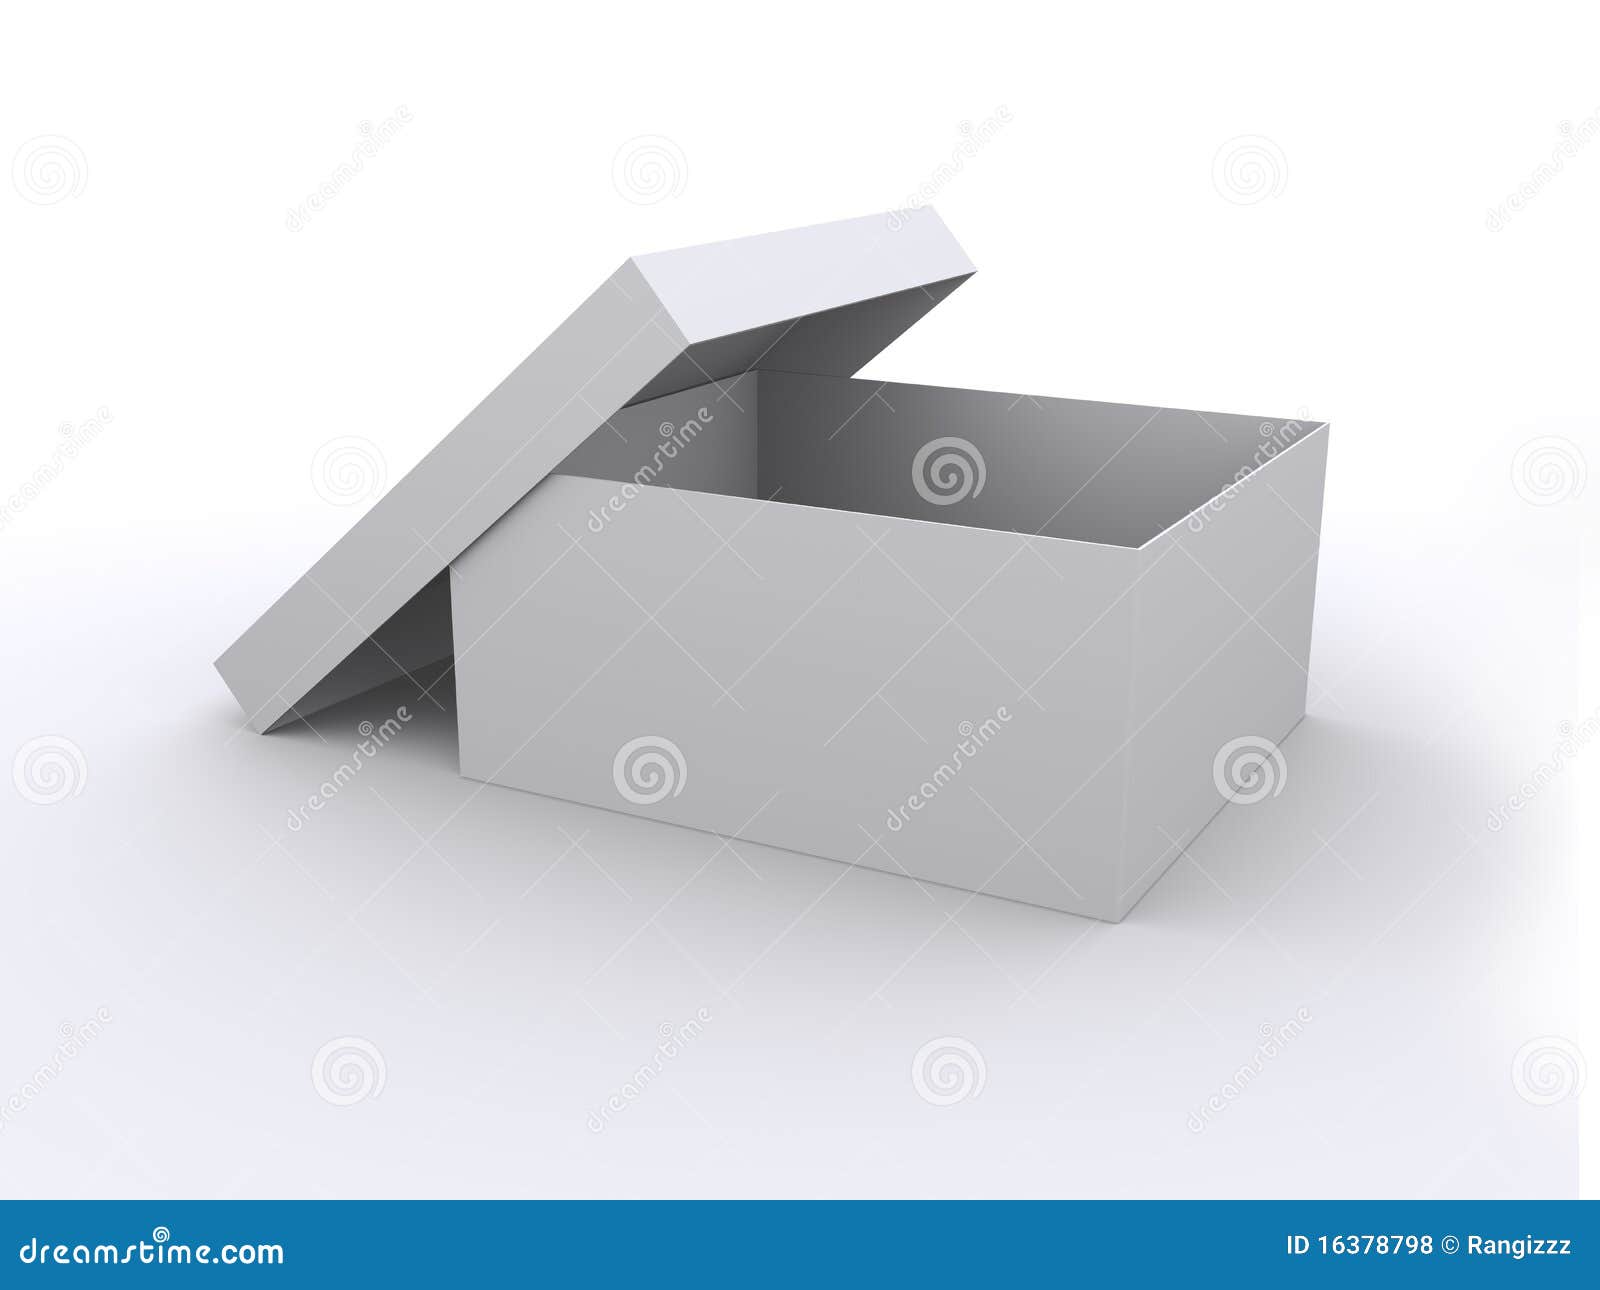 box open Cut Out Stock Images & Pictures - Alamy